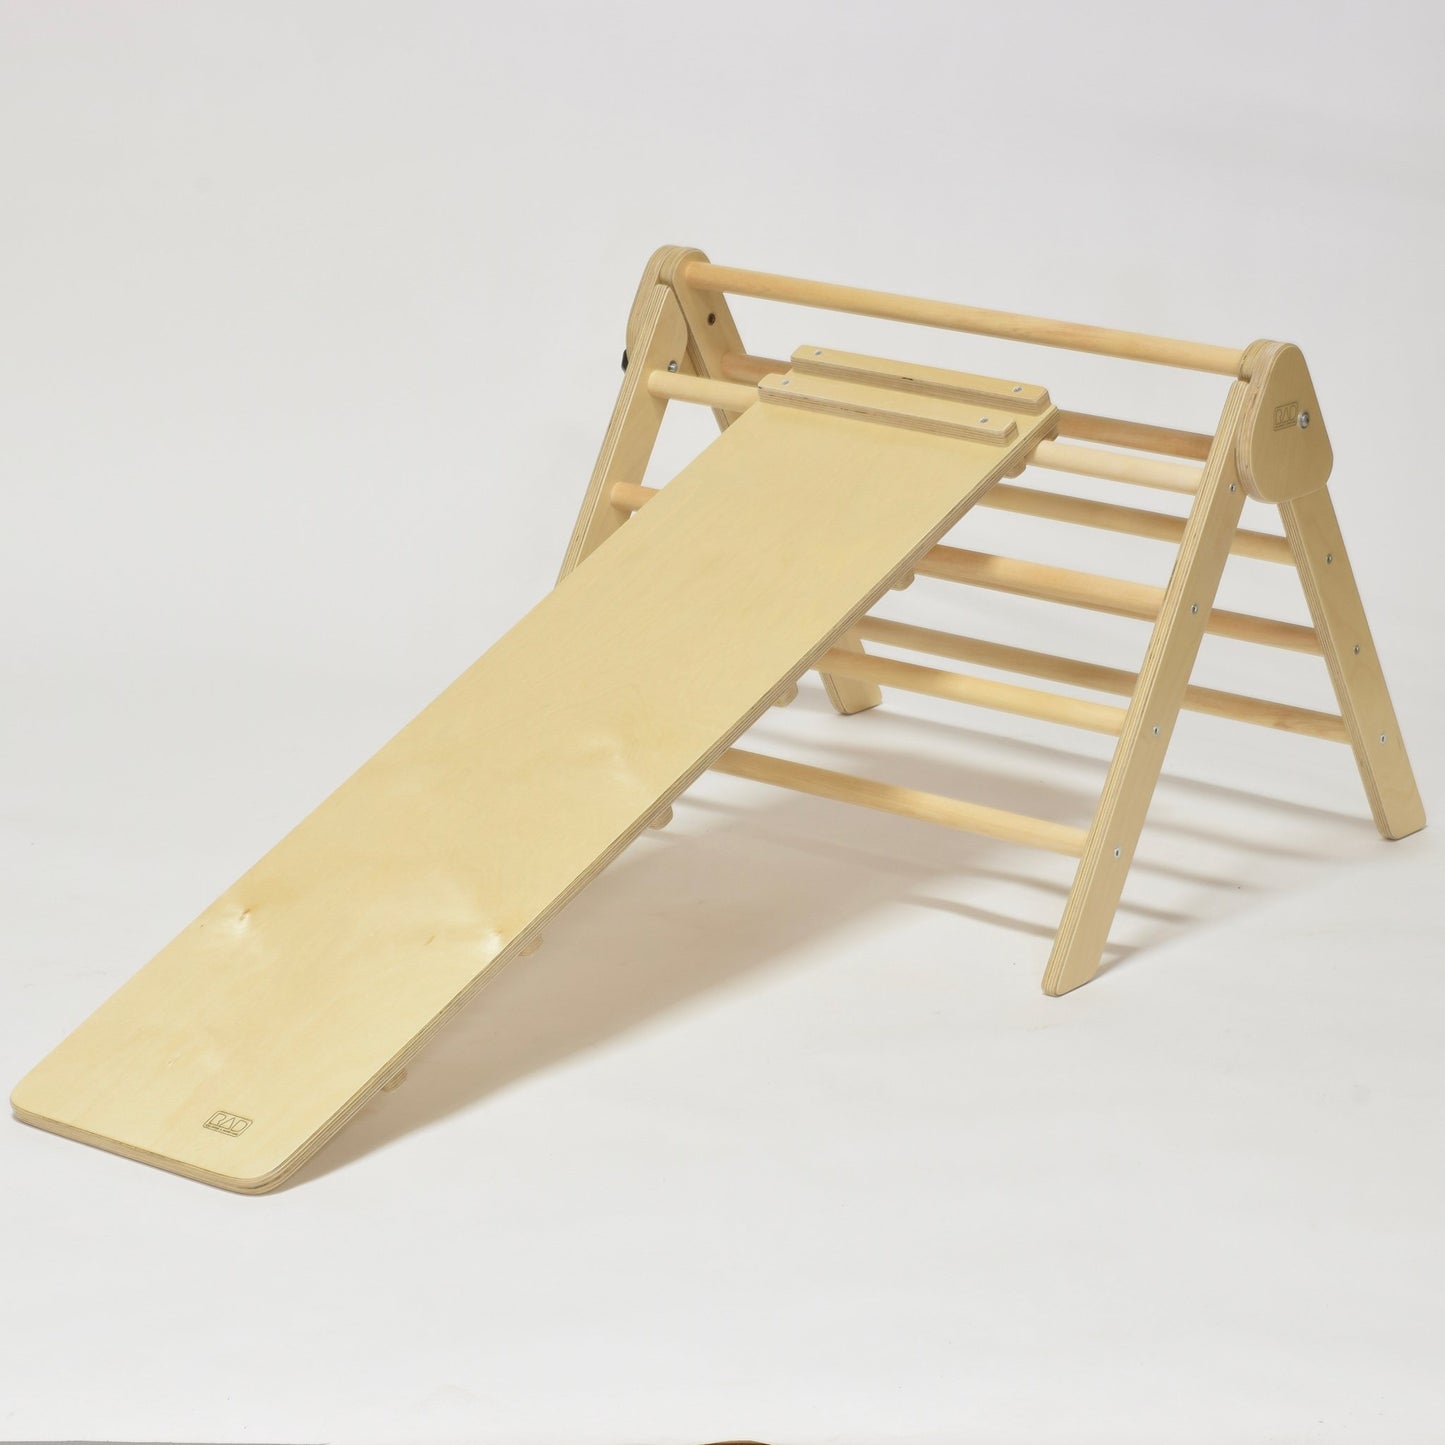 Foldable Pikler Triangle (Small) - RAD Children's Furniture - pikler triangle - montessori toddler furniture - climbing triangle - nursery room